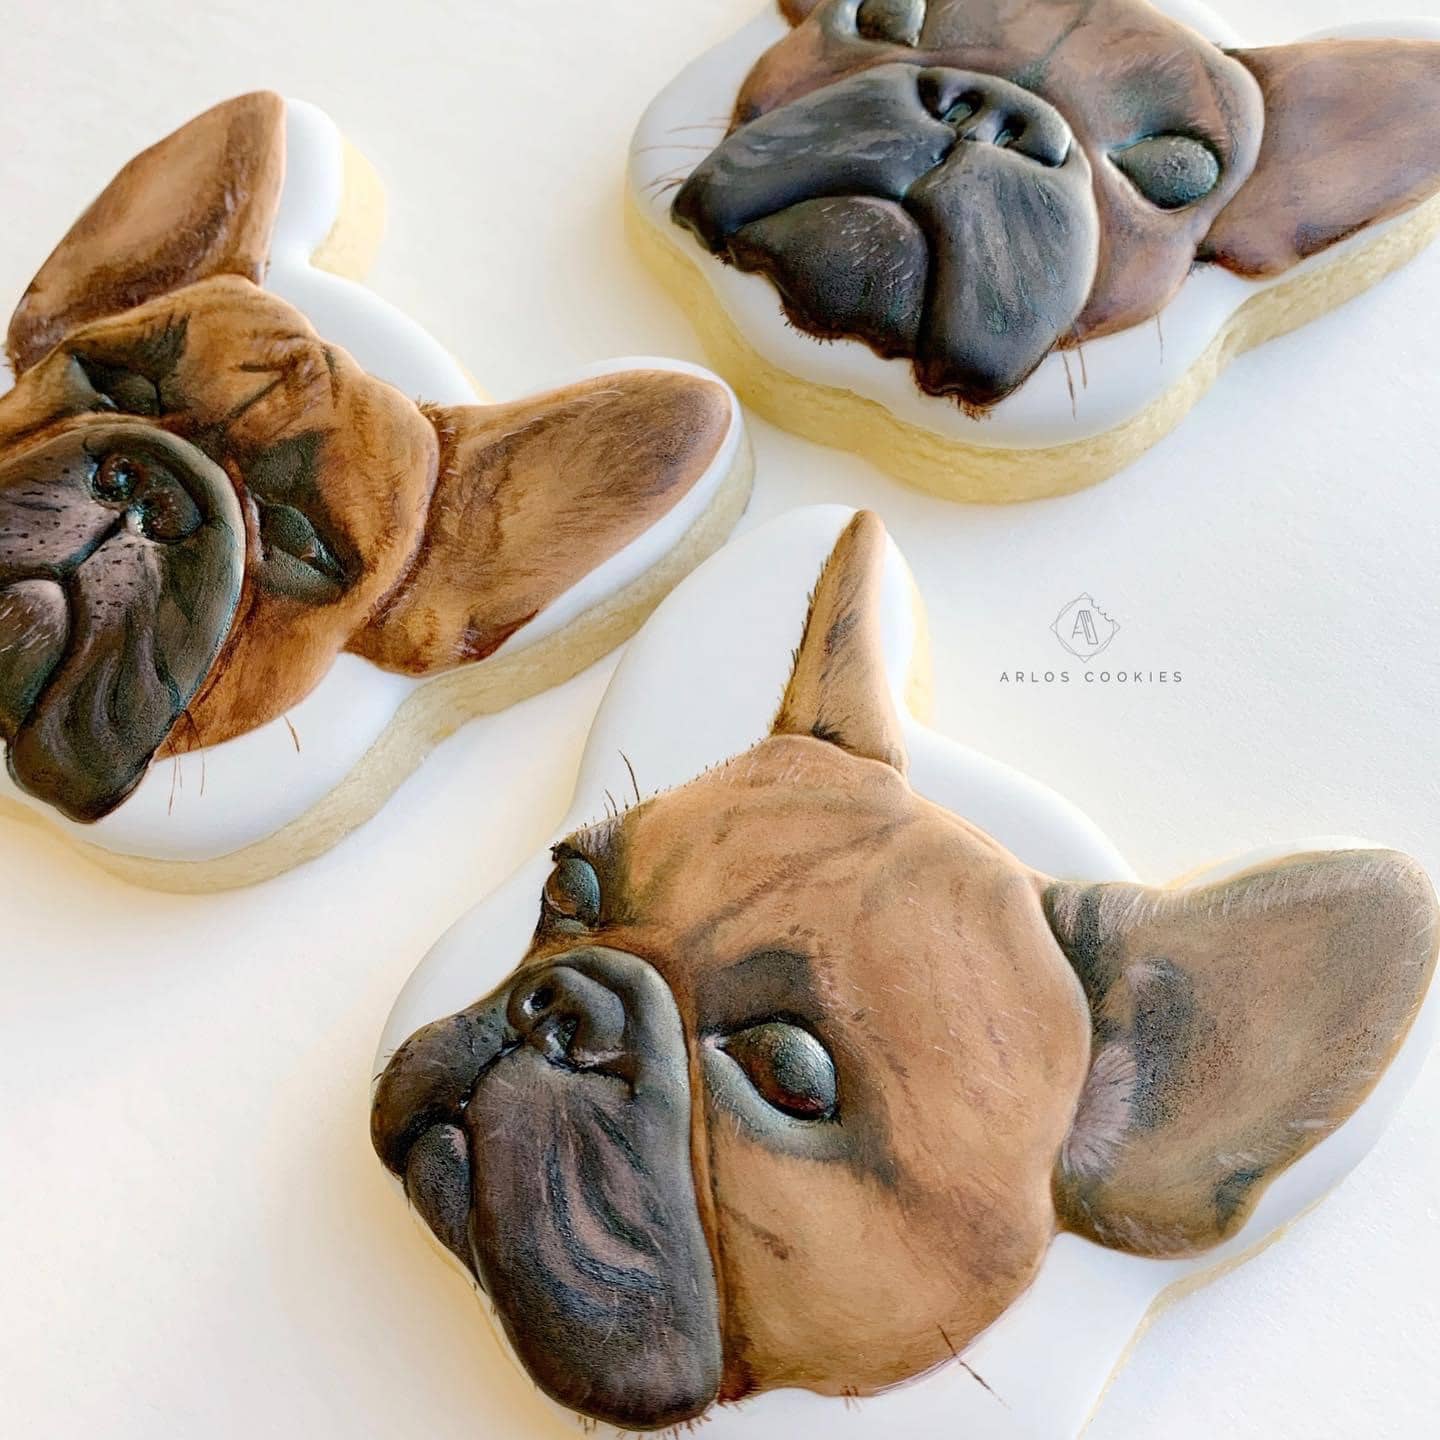 Hyperrealistically painted cookies featuring a dog.